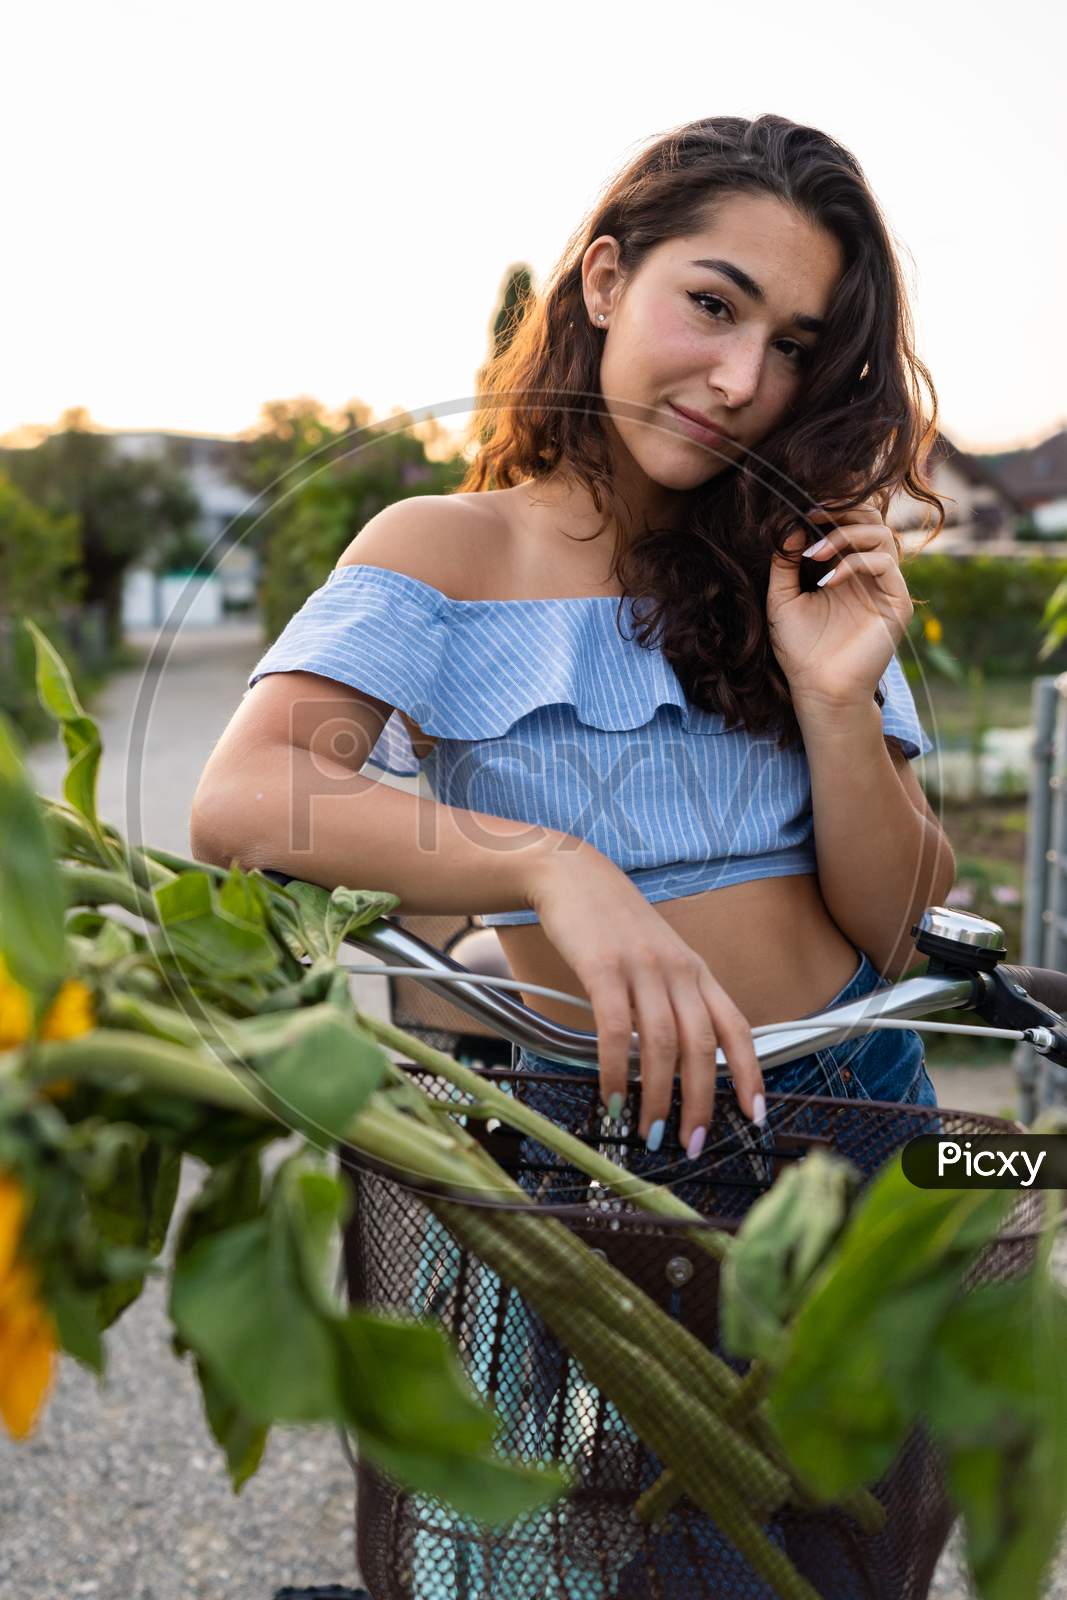 Beautiful Young Lady Walking Through An Allotment While Pushing Her Turquoise Bicycle With Sunflowers In A Basket.